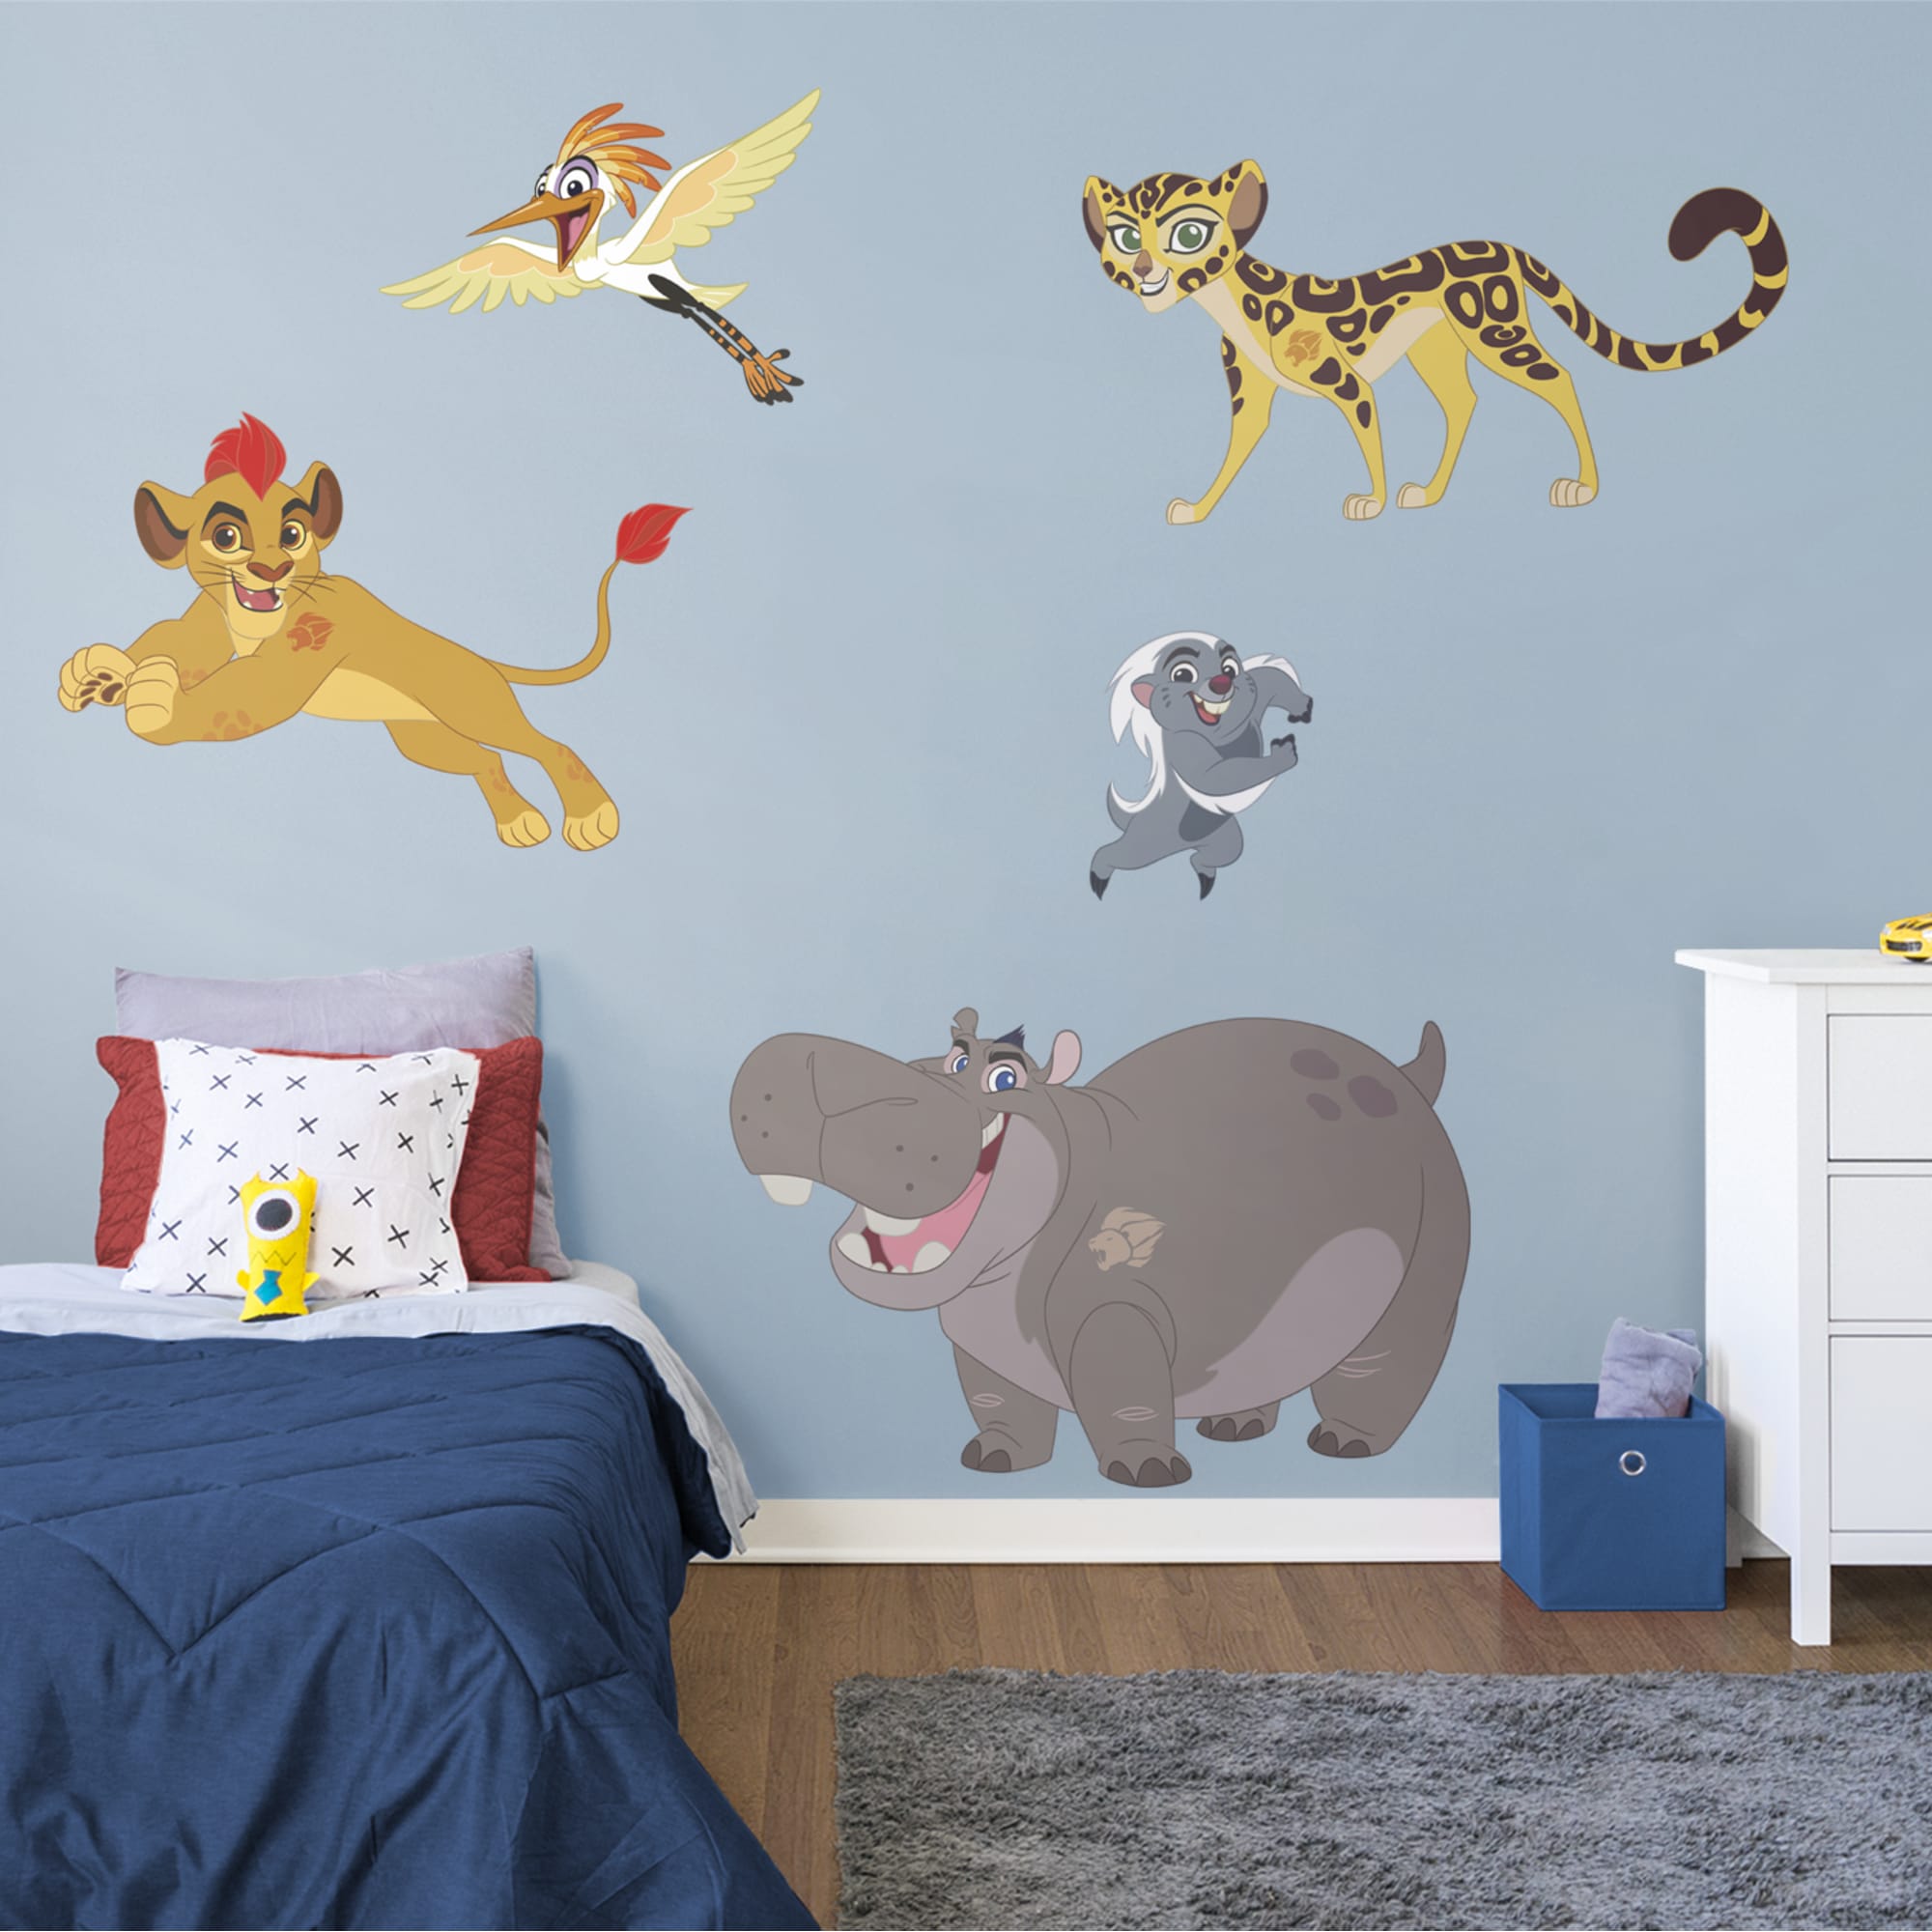 Lion Guard: Collection - Officially Licensed Disney Removable Wall Decals 81.0"W x 54.0"H by Fathead | Vinyl